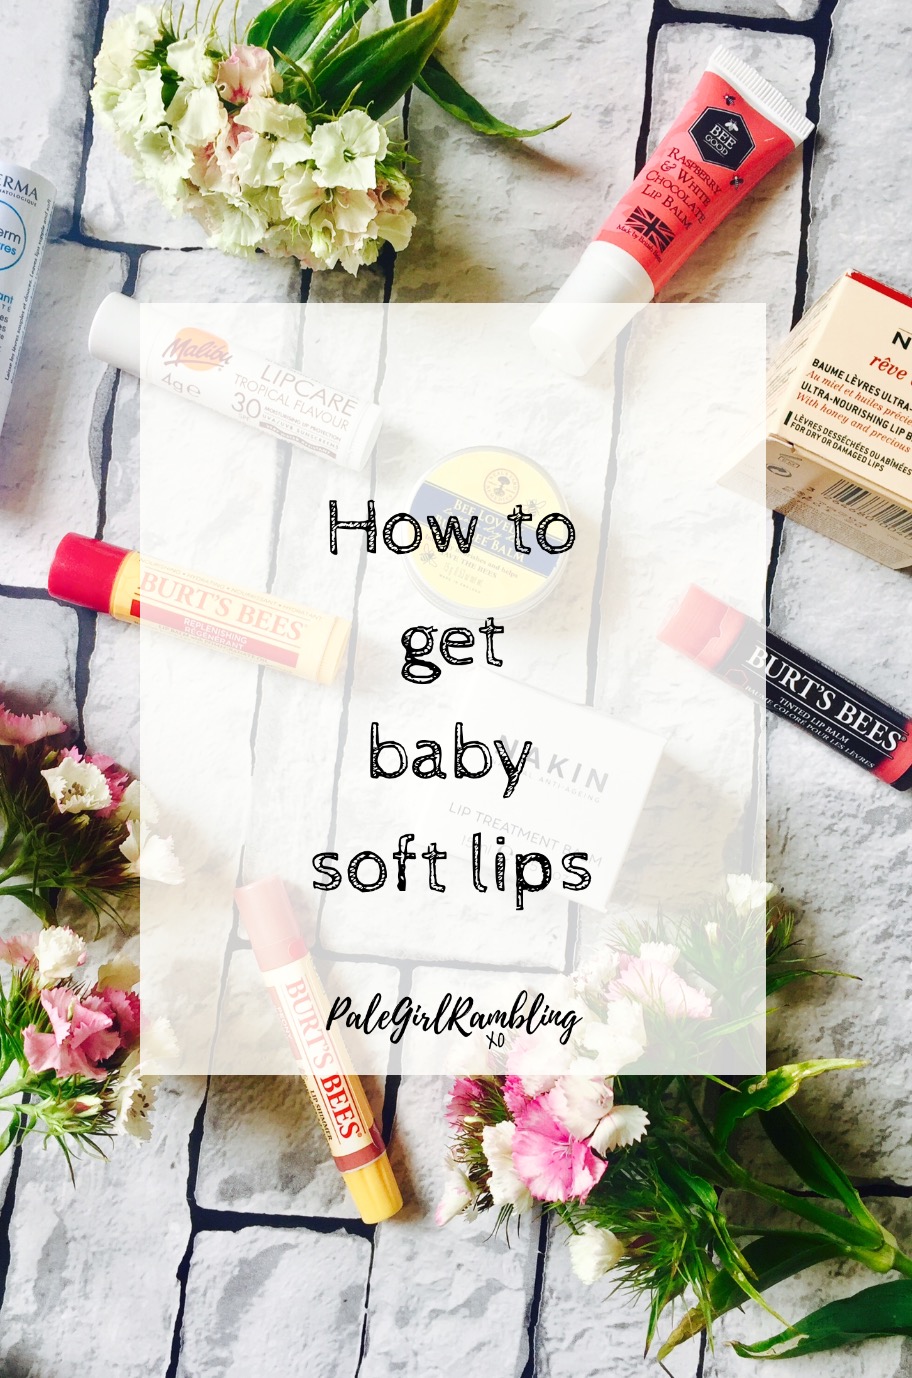 Lip care tips how to get baby soft lips